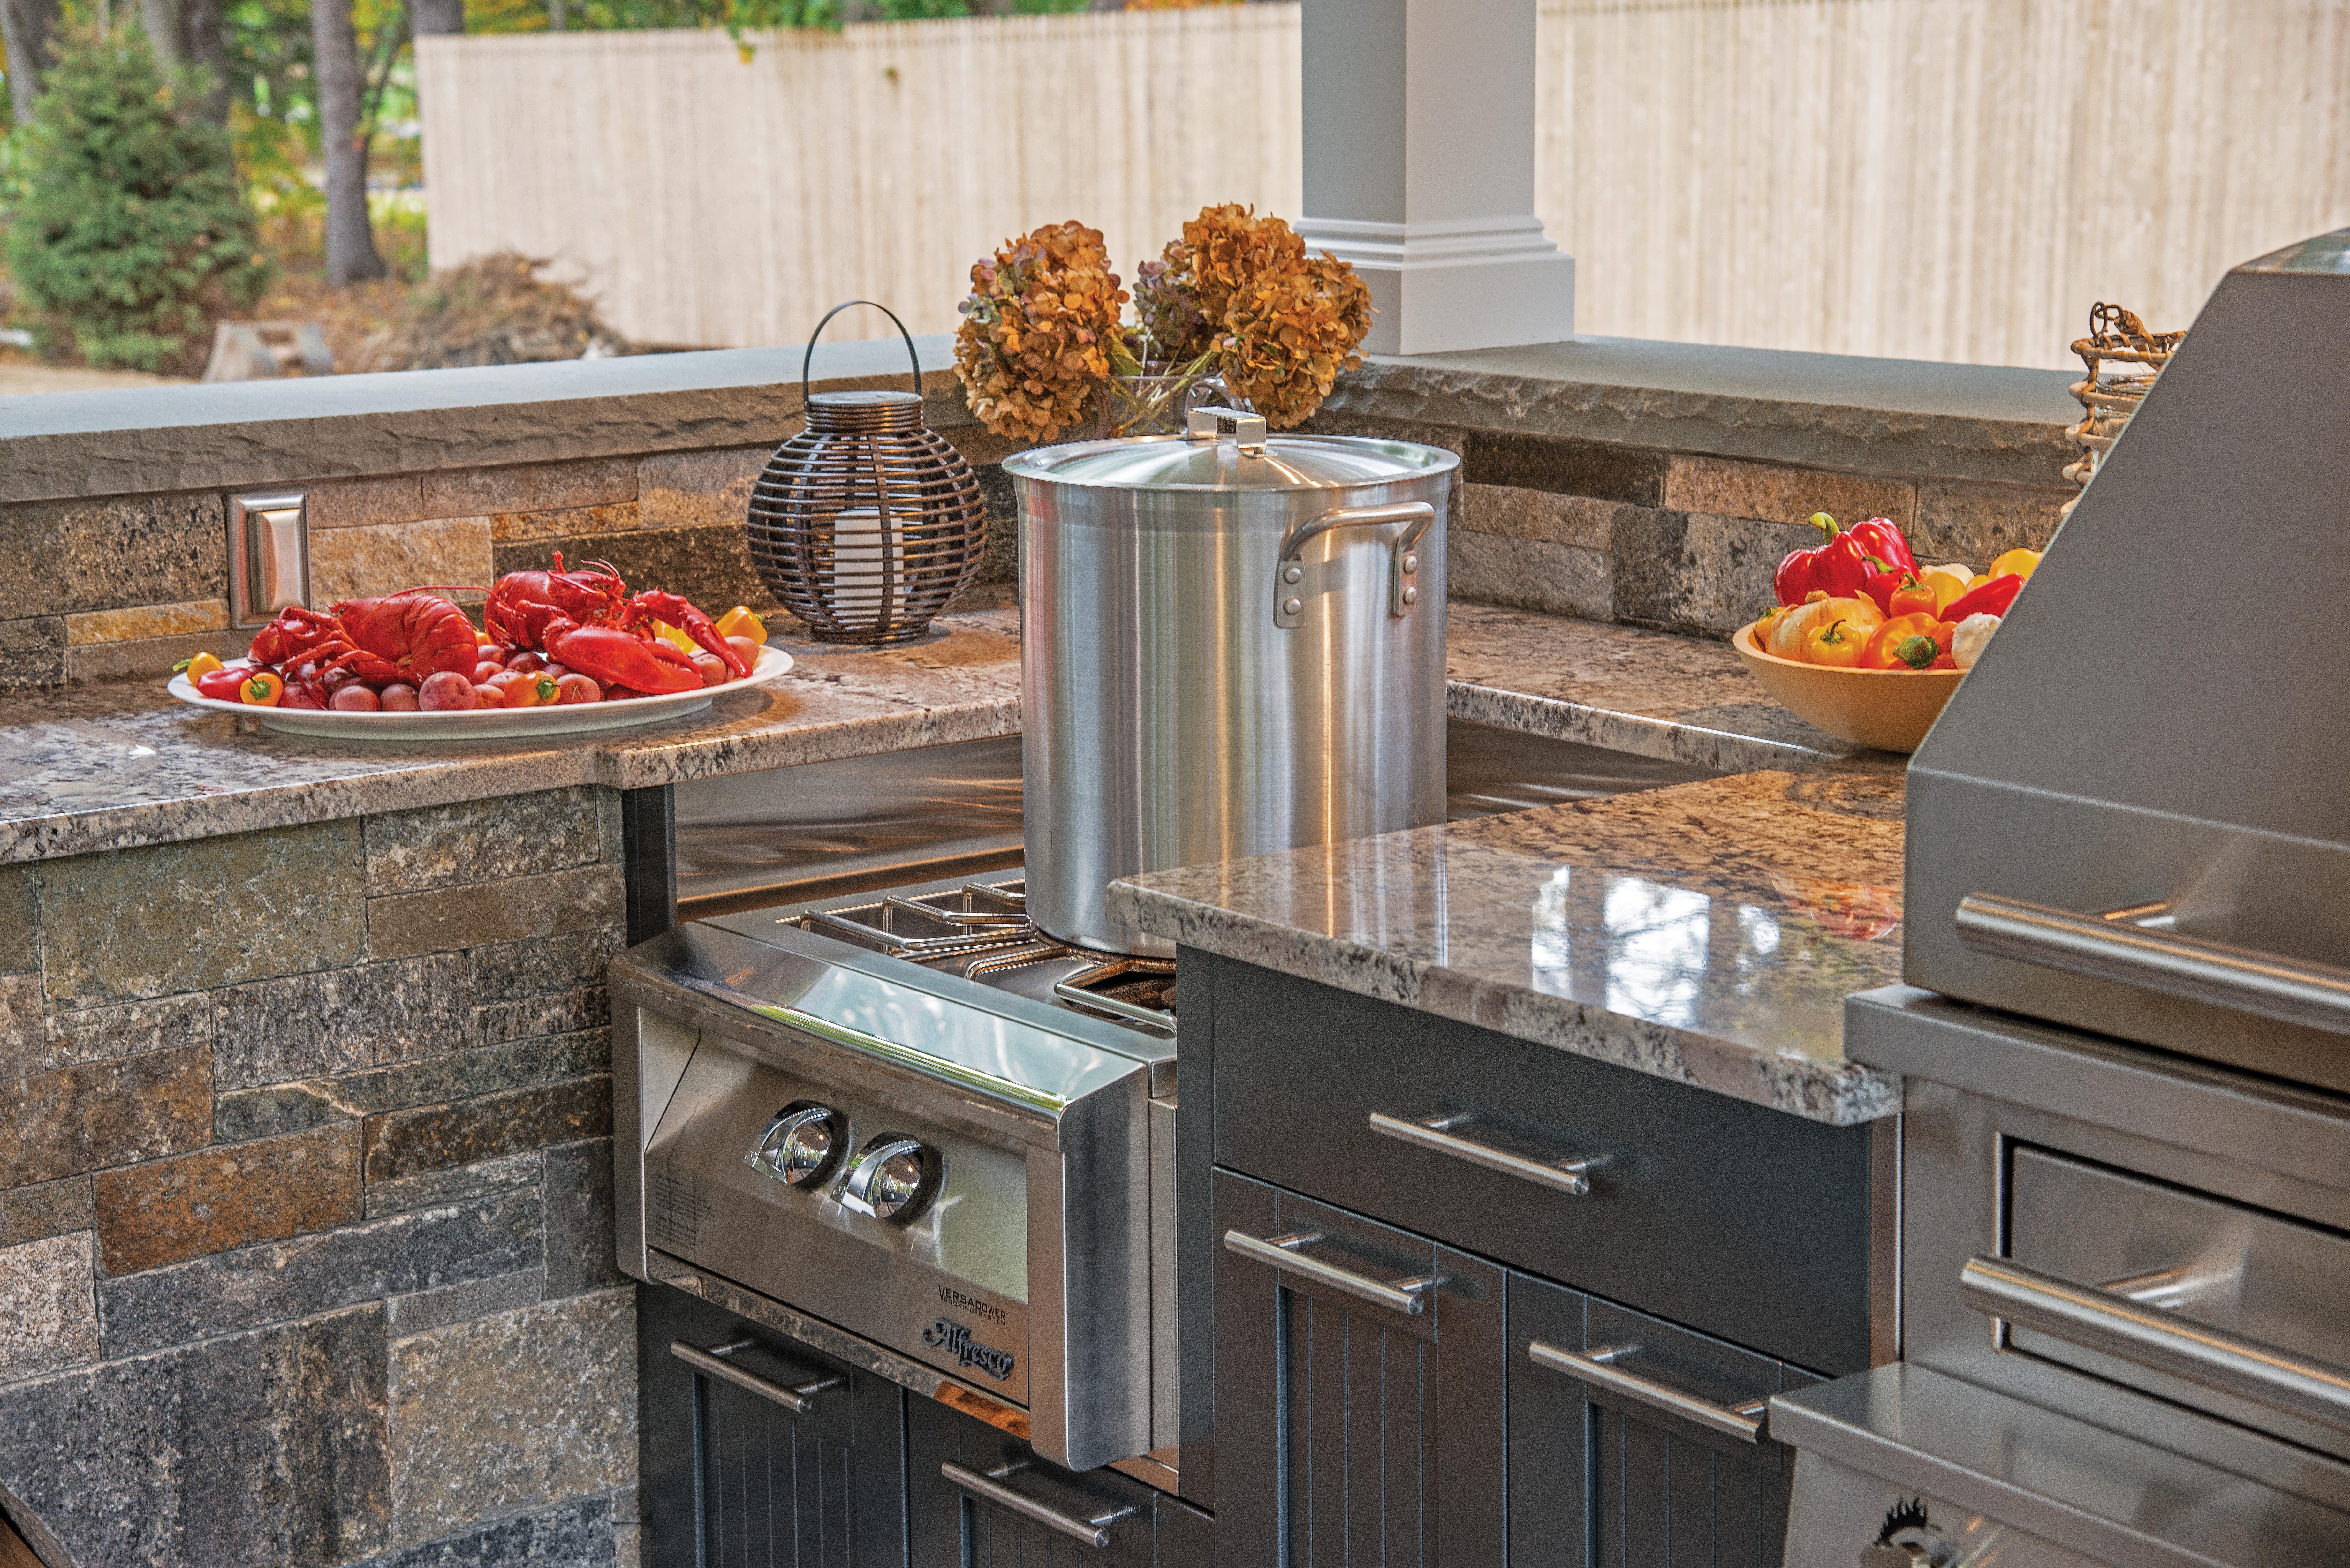 Best Outdoor Kitchen Appliances You Need, What Are The Best Outdoor Kitchen Appliances